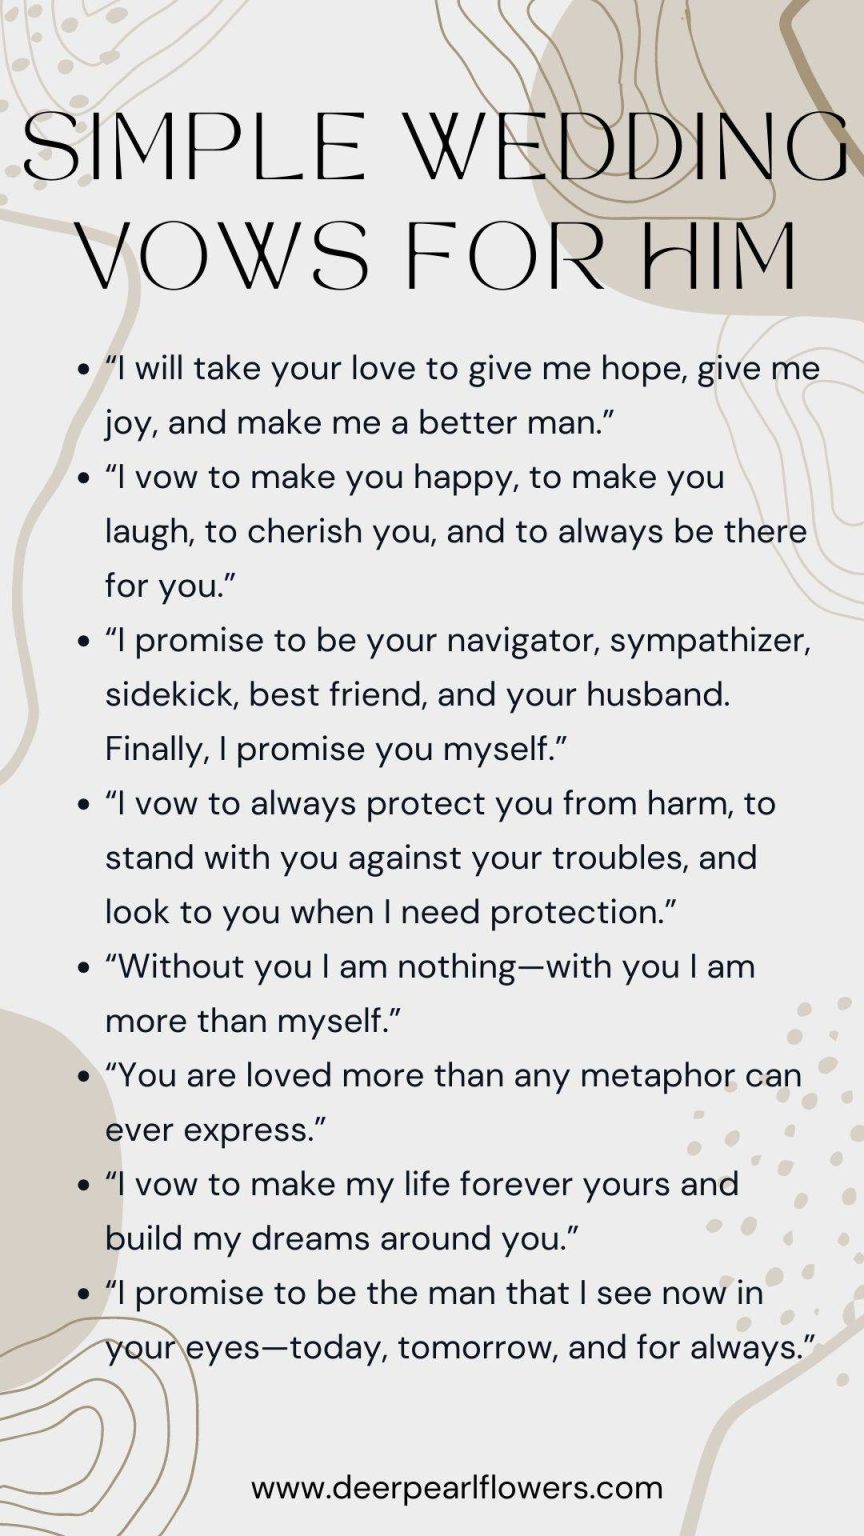 Simple Wedding Vows For Him 864x1536 